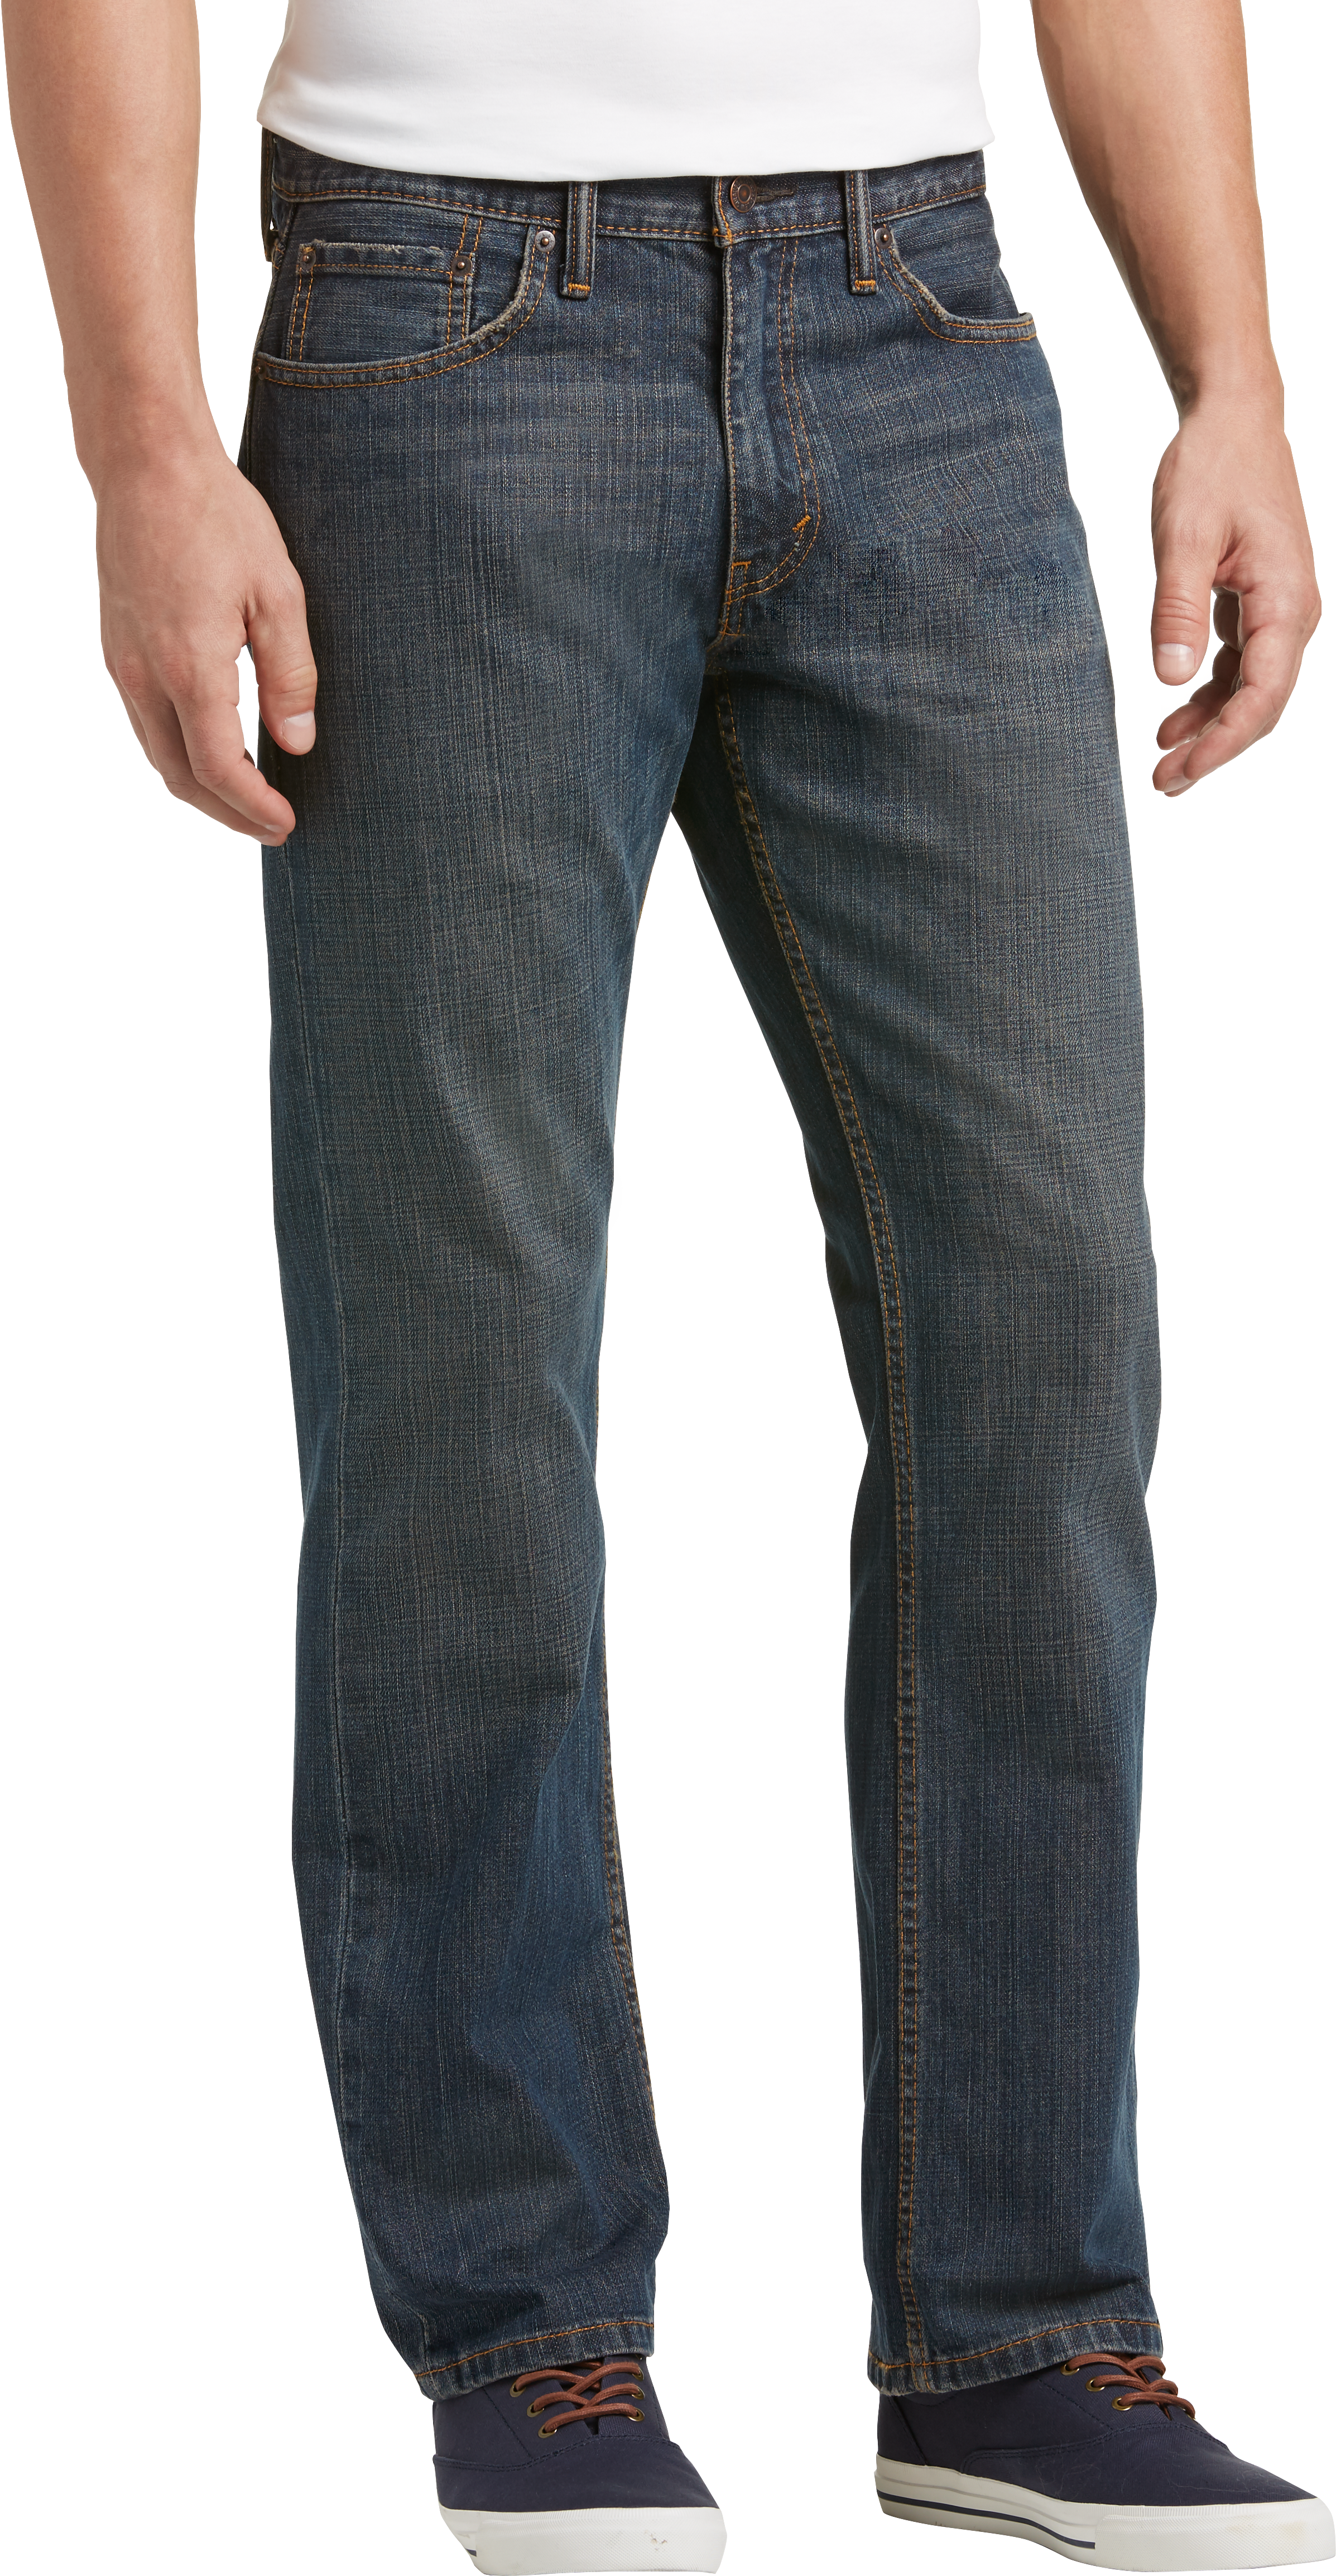 Levi's® 559™ Dark Wash Relaxed Fit Jeans - Men's | Men's Wearhouse